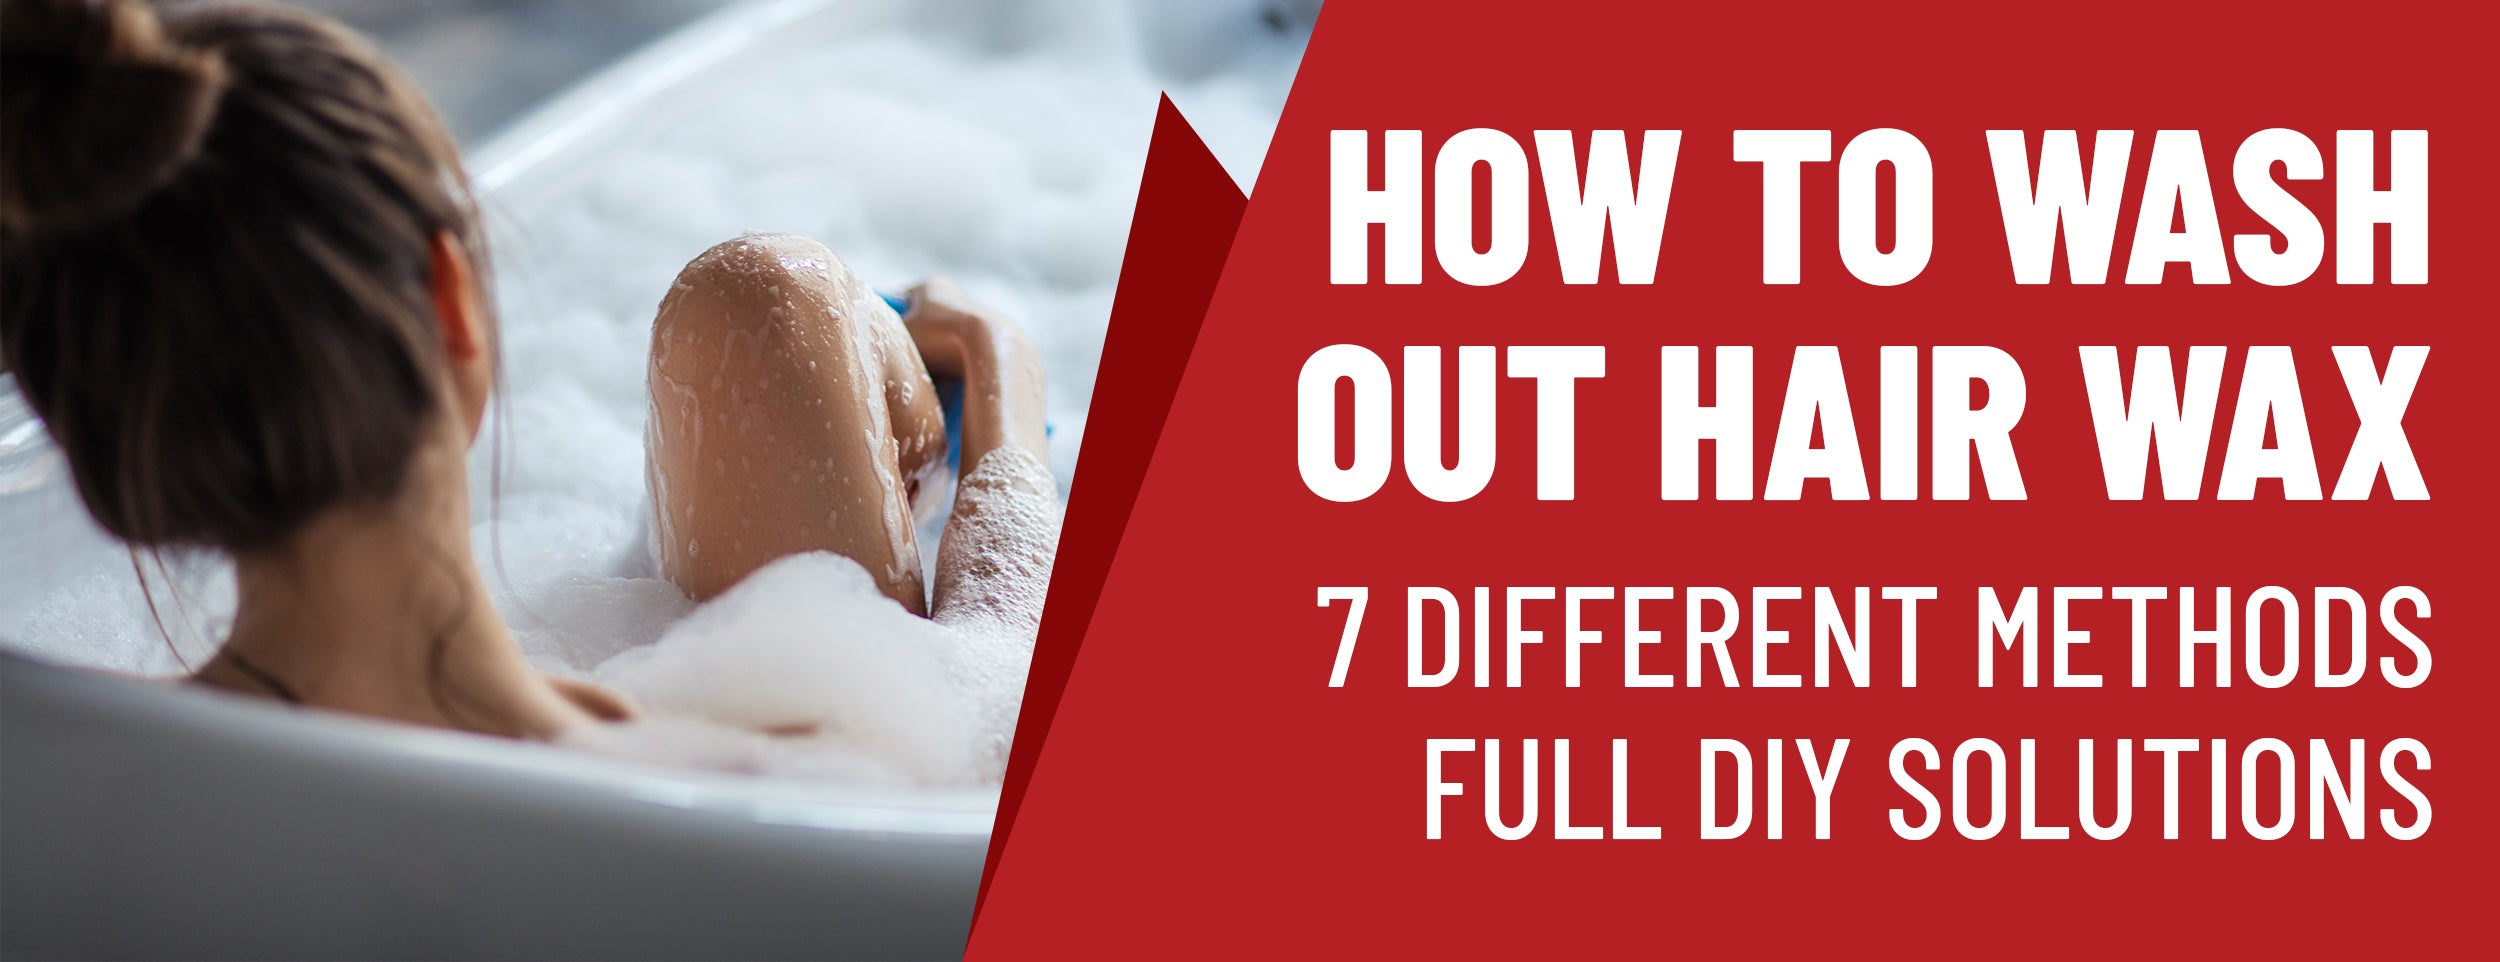 Different Methods and Facts of Washing Out Hair Wax